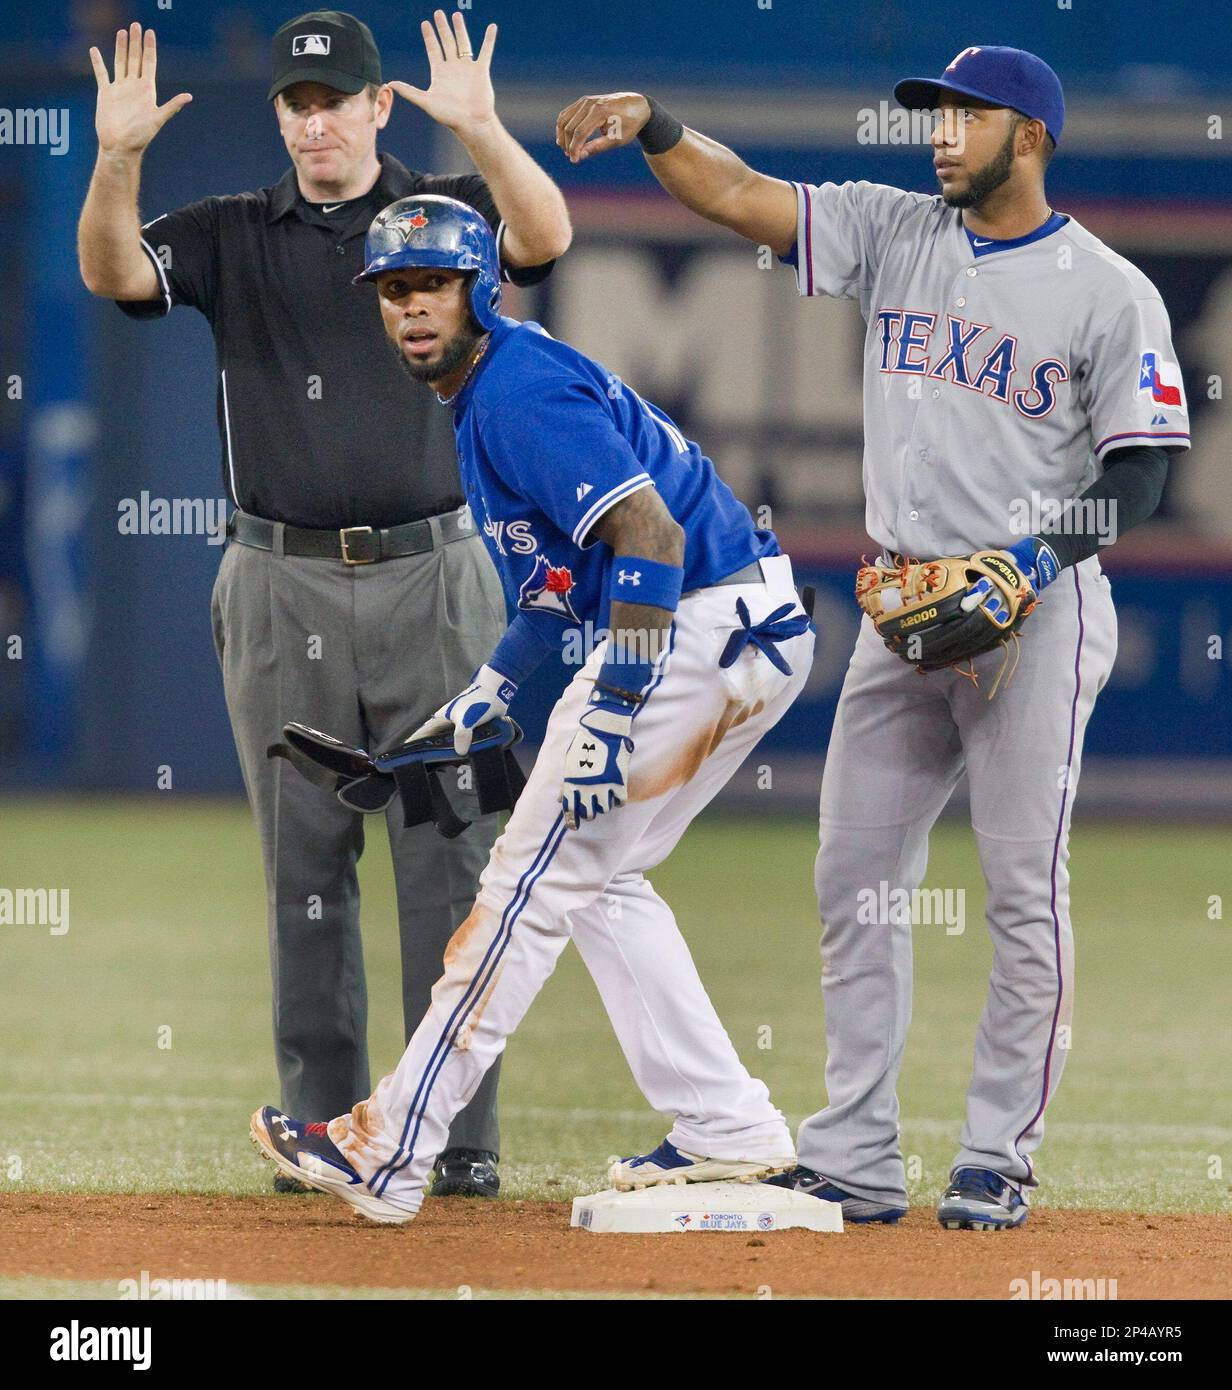 Toronto Blue Jays' Jose Reyes stands at second base after hitting a stand  up double as Texas Rangers' Elvis Andrus looks on and second base umpire  Chris Conroy calls for time during